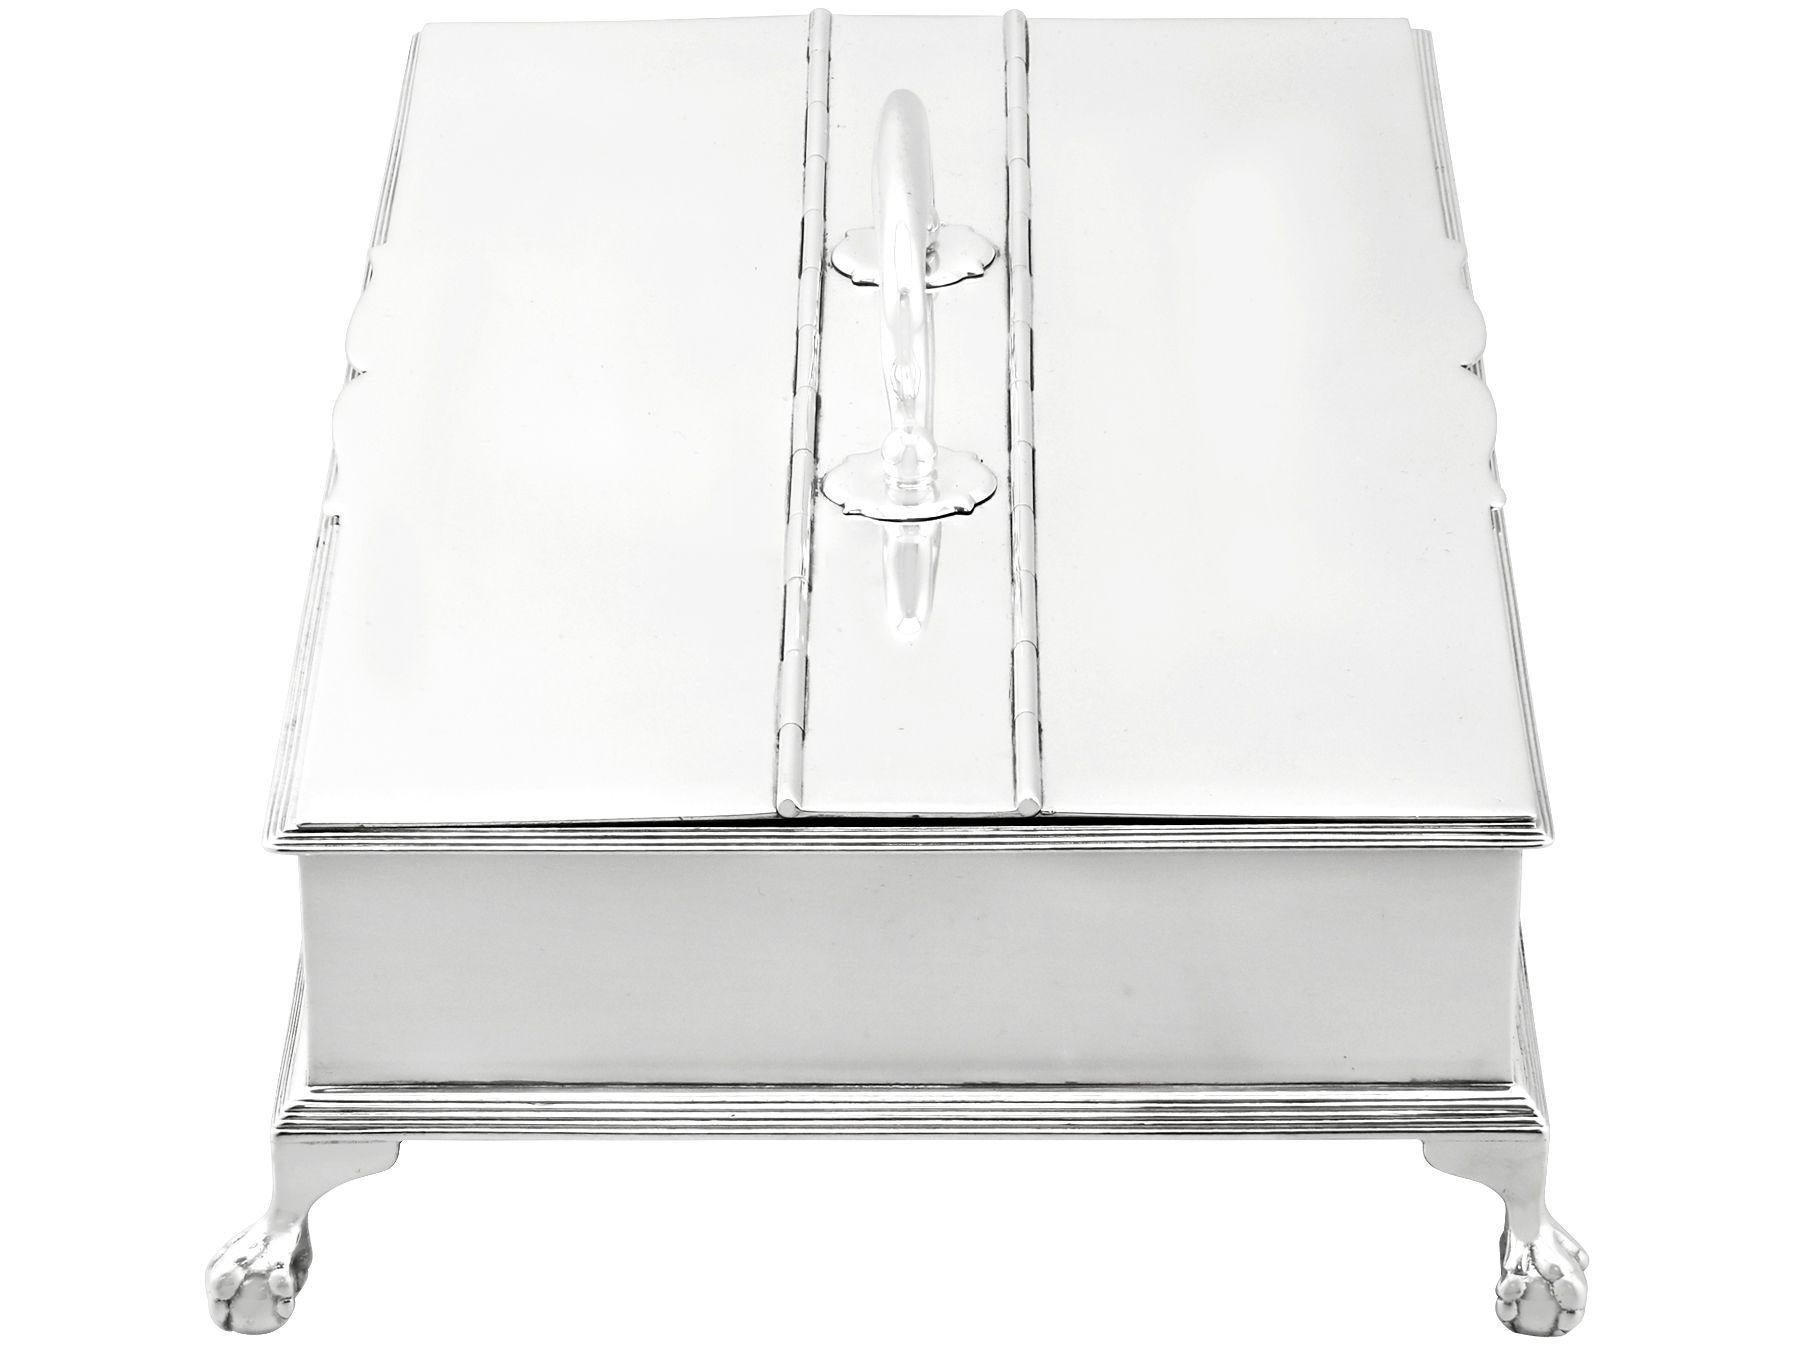 An exceptional, fine and impressive antique George VI English sterling silver treasury inkstand; an addition to our ornamental silverware collection

This exceptional antique George VI sterling silver treasury inkstand has a rectangular